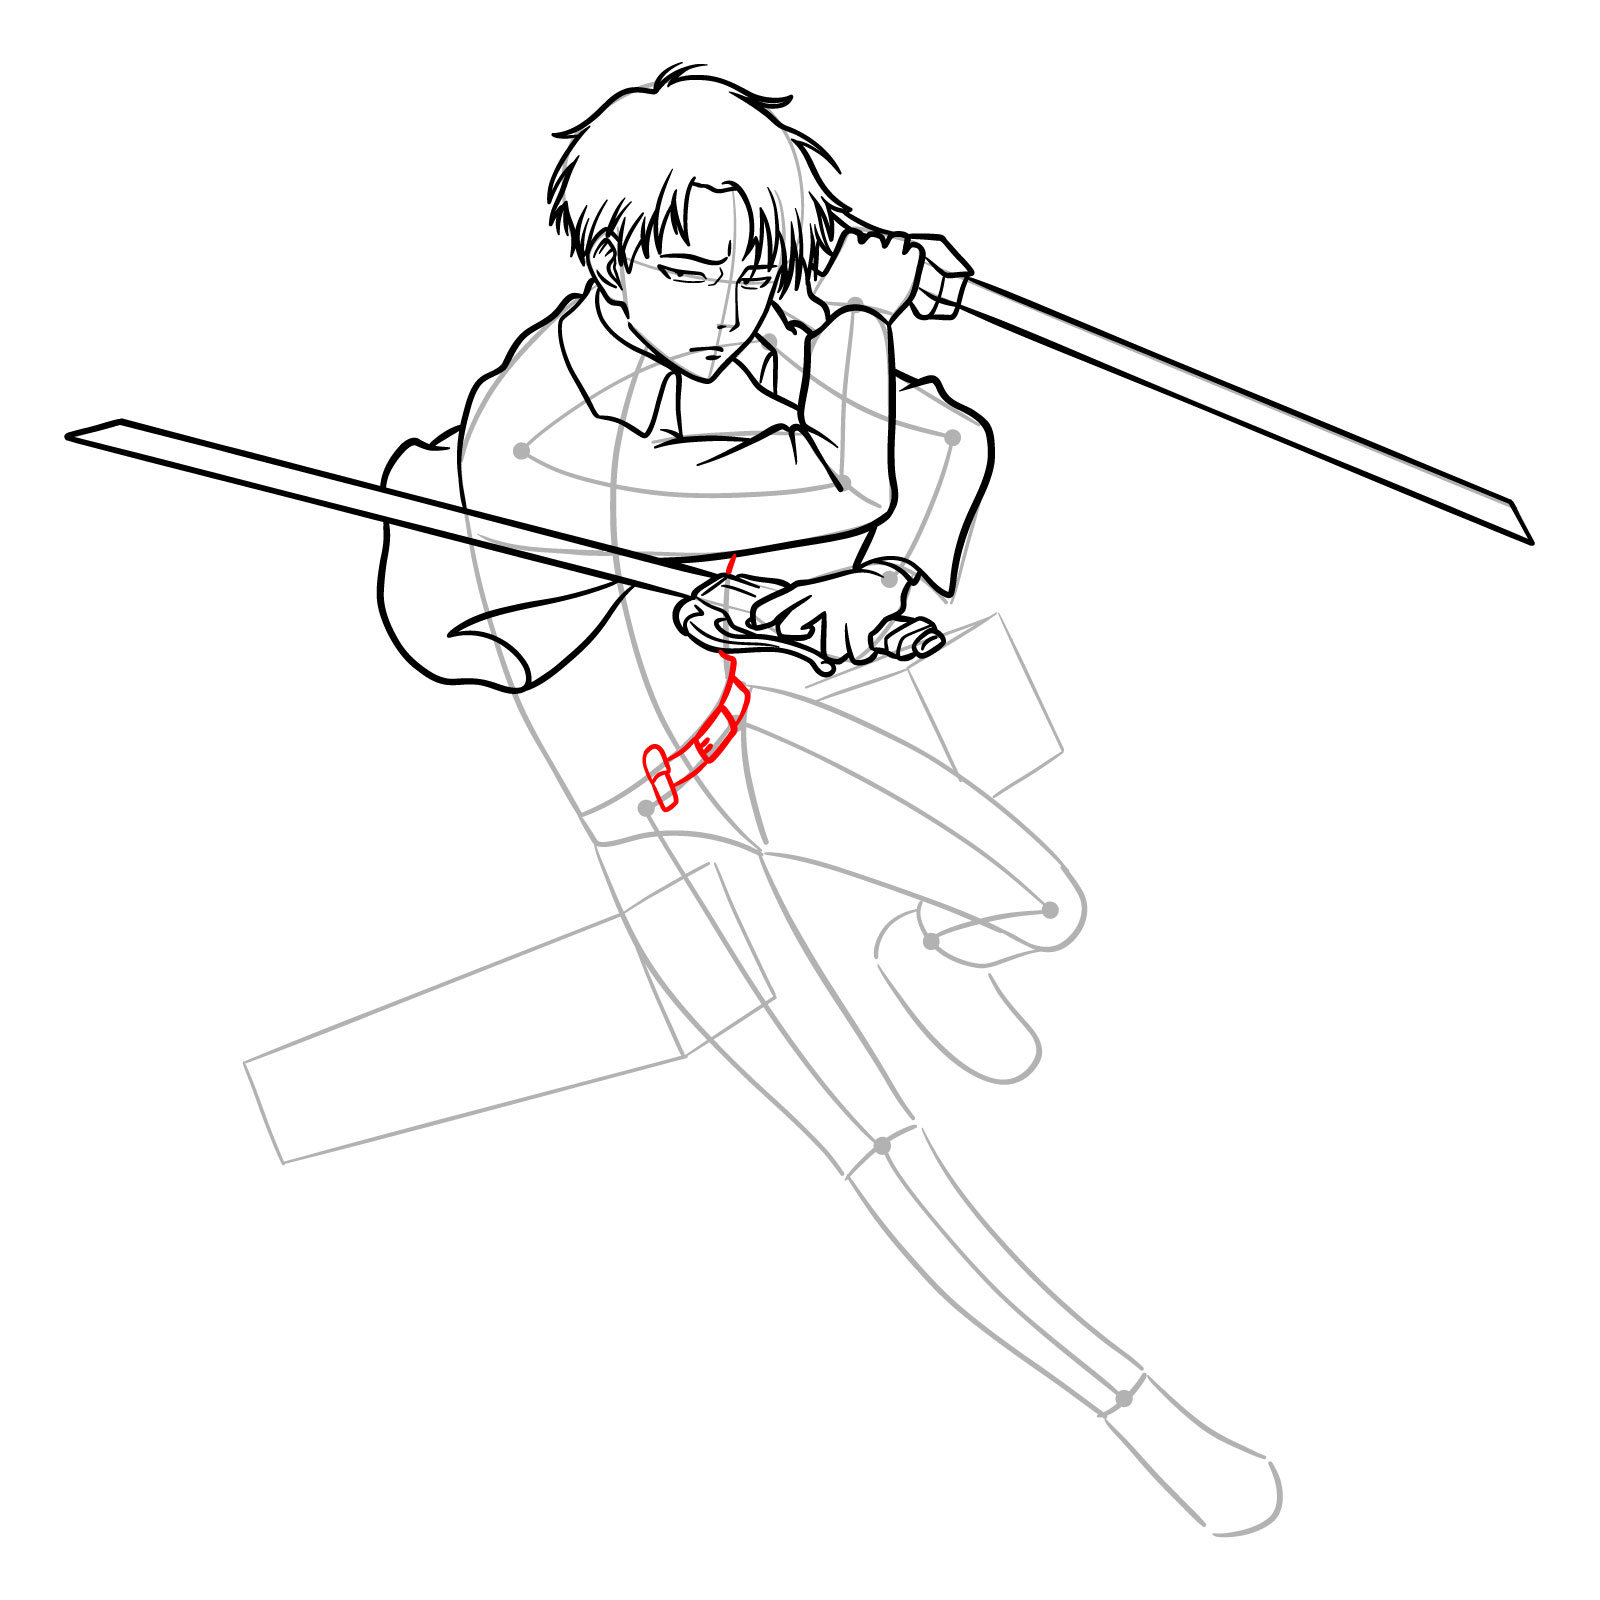 Details of Captain Levi's utility belt and waist in an action pose drawing - step 17